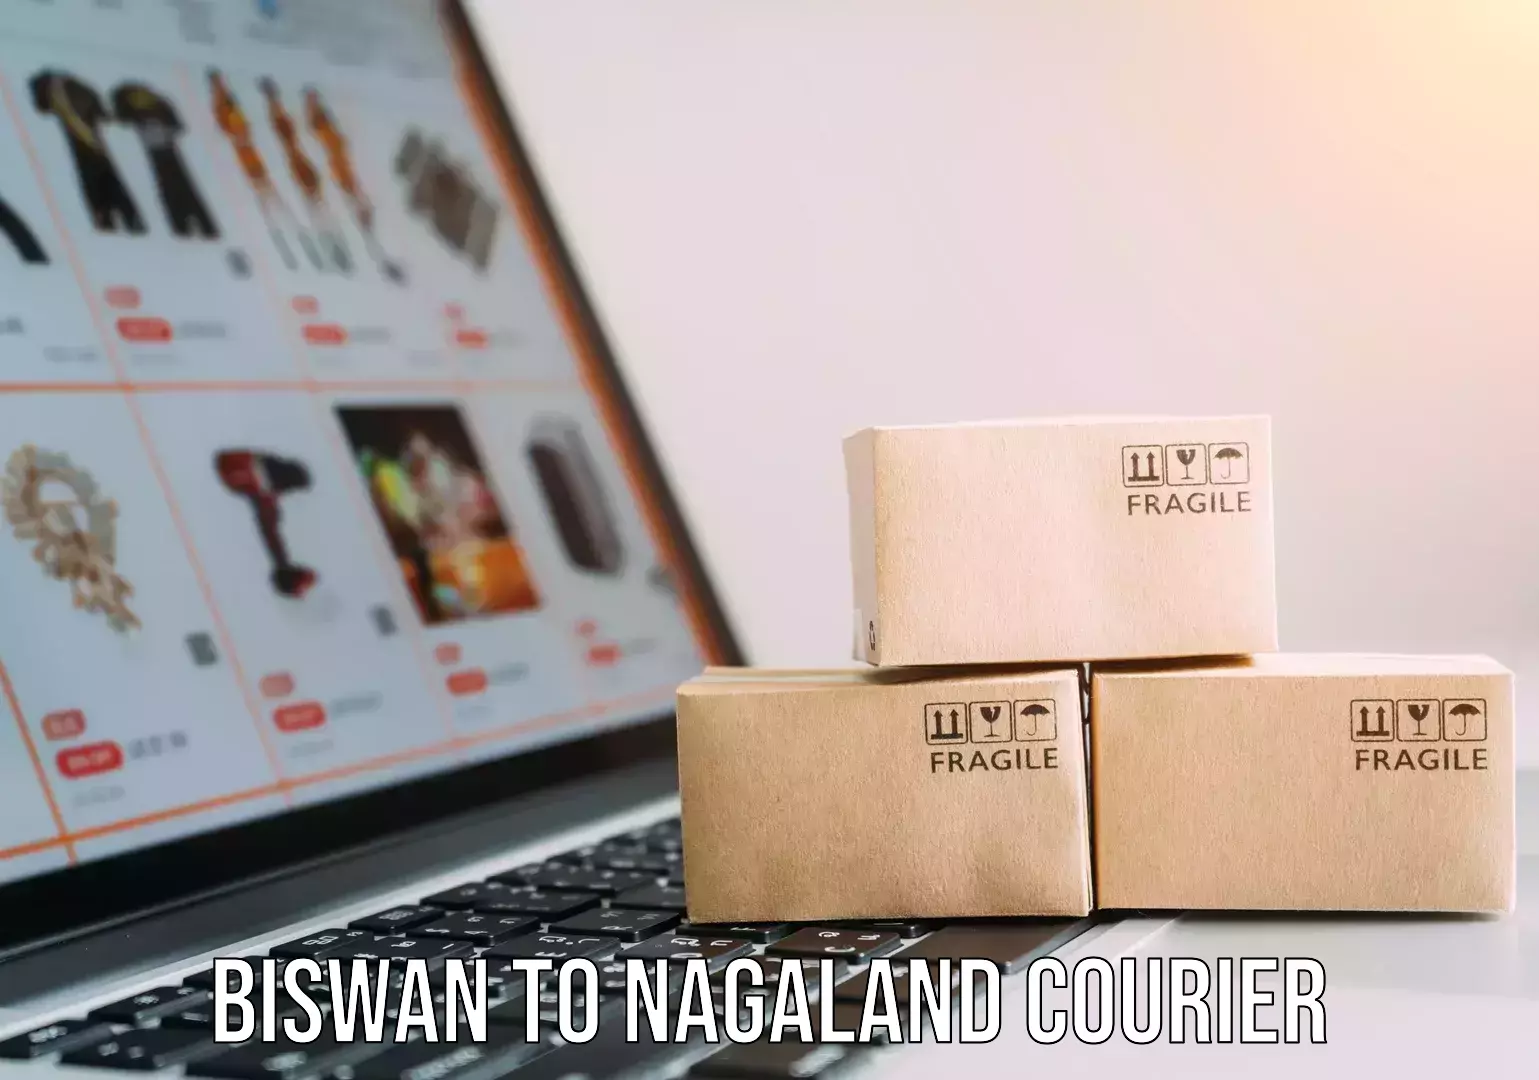 Online shipping calculator Biswan to Nagaland